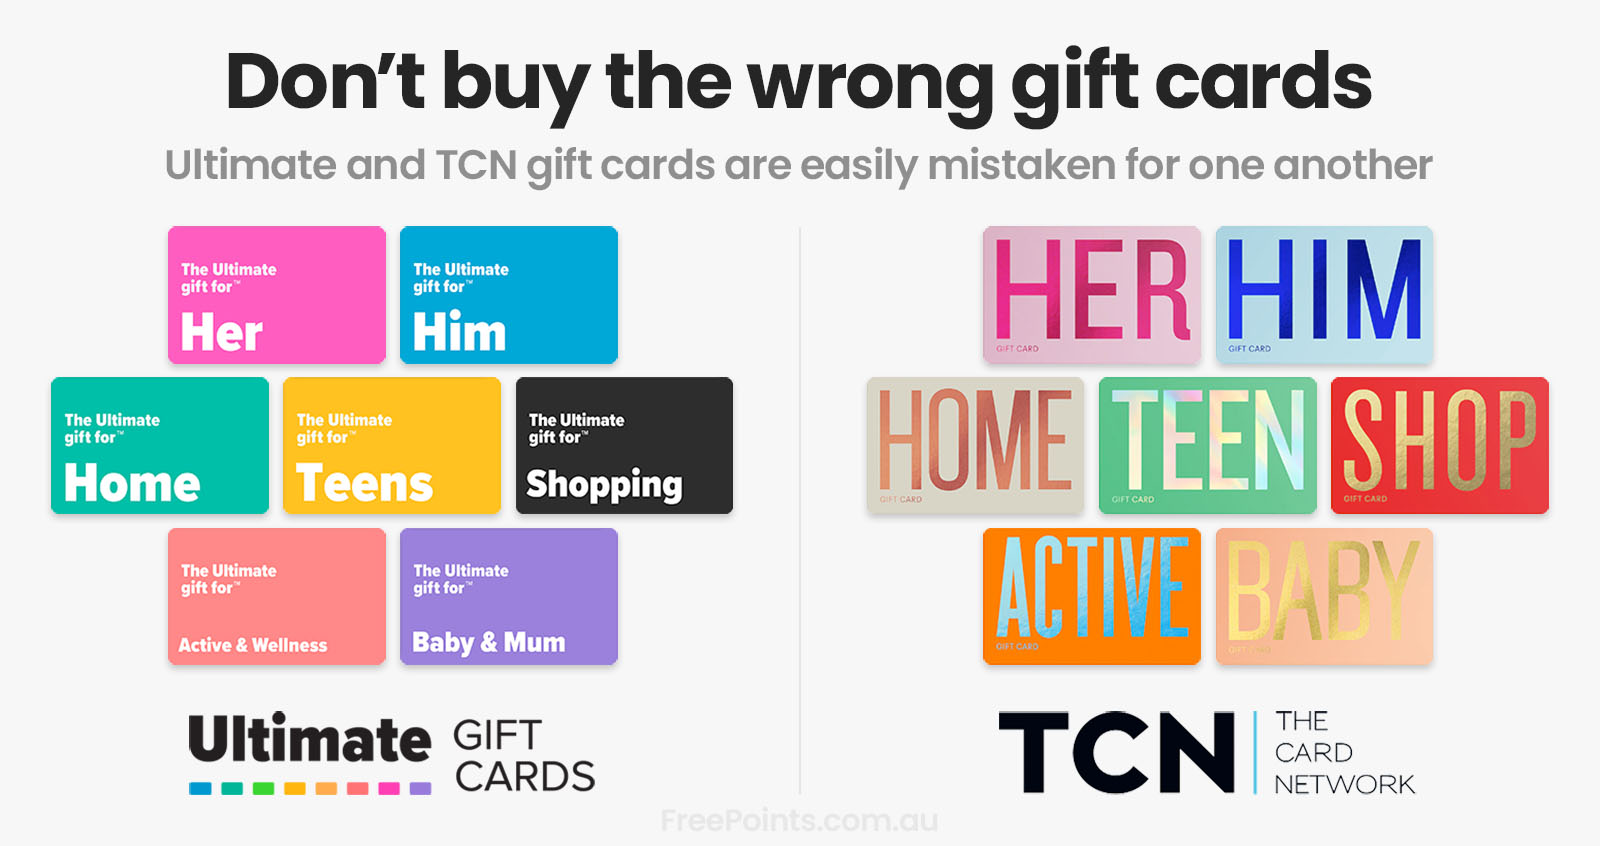 Coles vs Woolworths: Which one offers the most gift card bonus points?